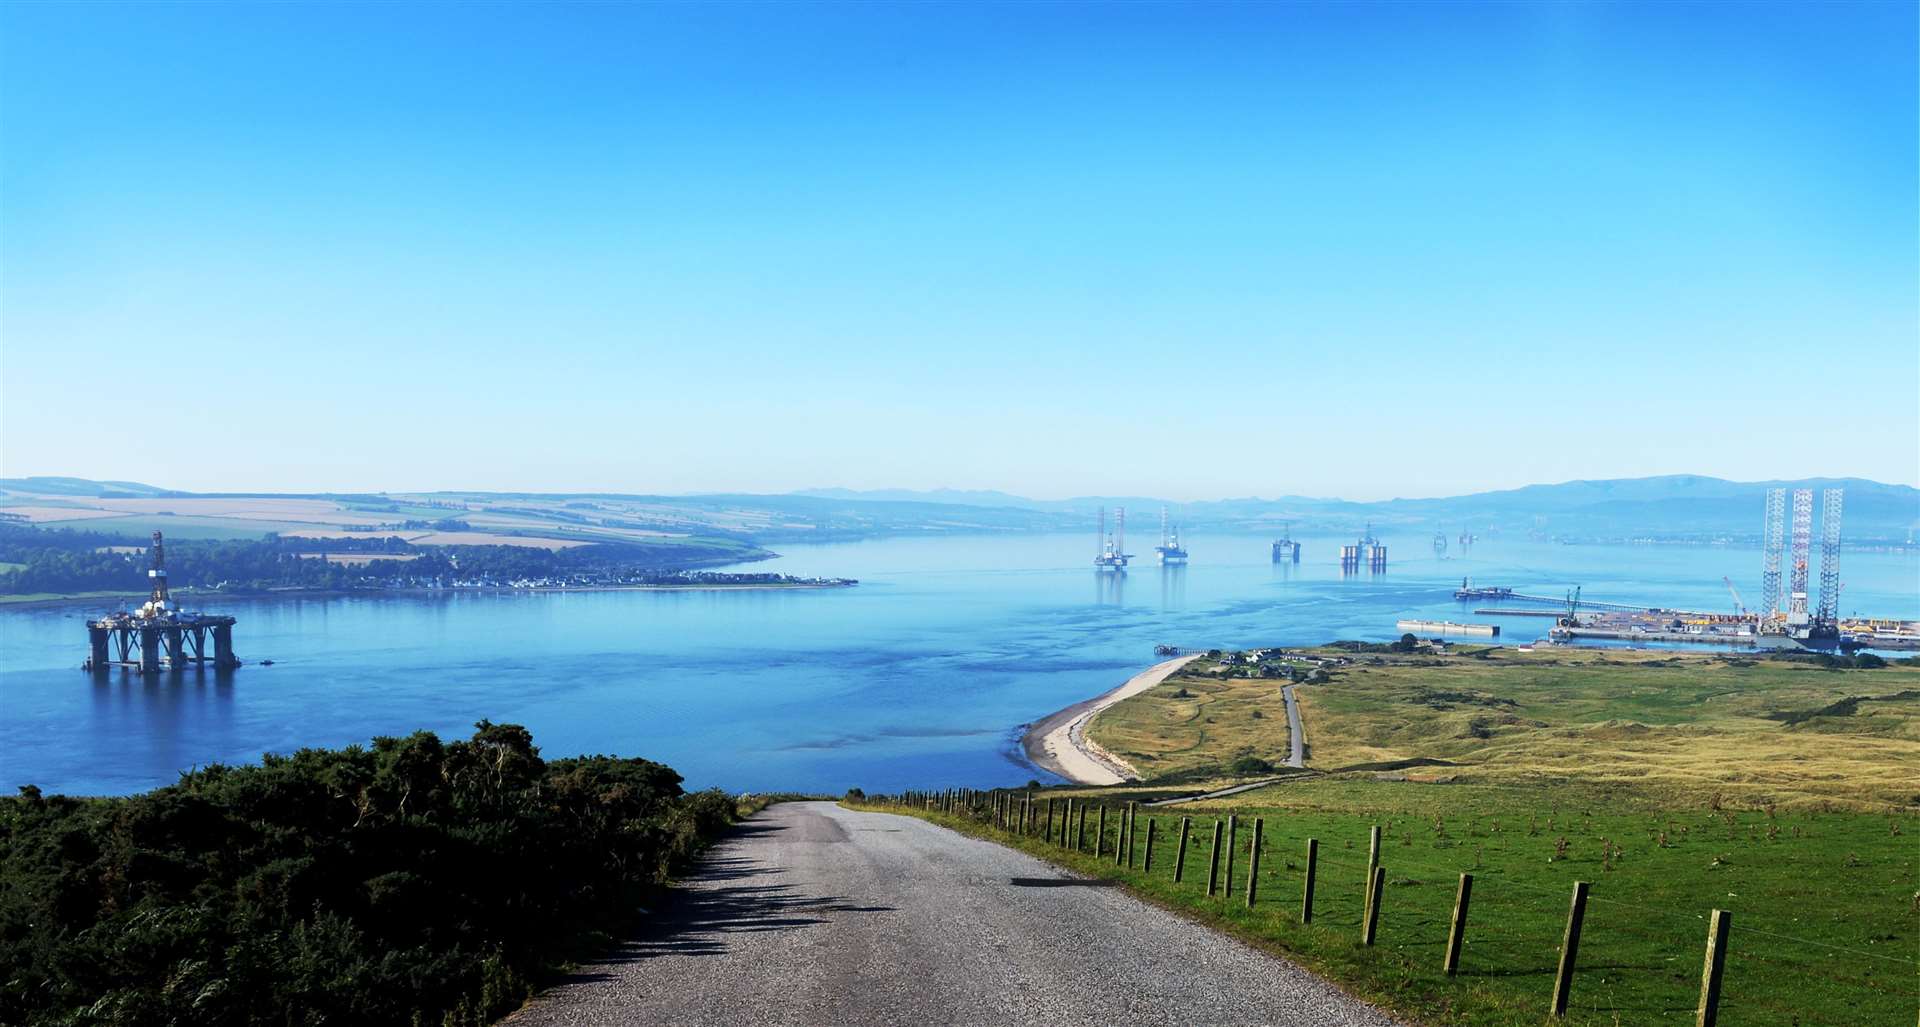 A view of the Cromarty Firth. Picture: Gary Anthony.